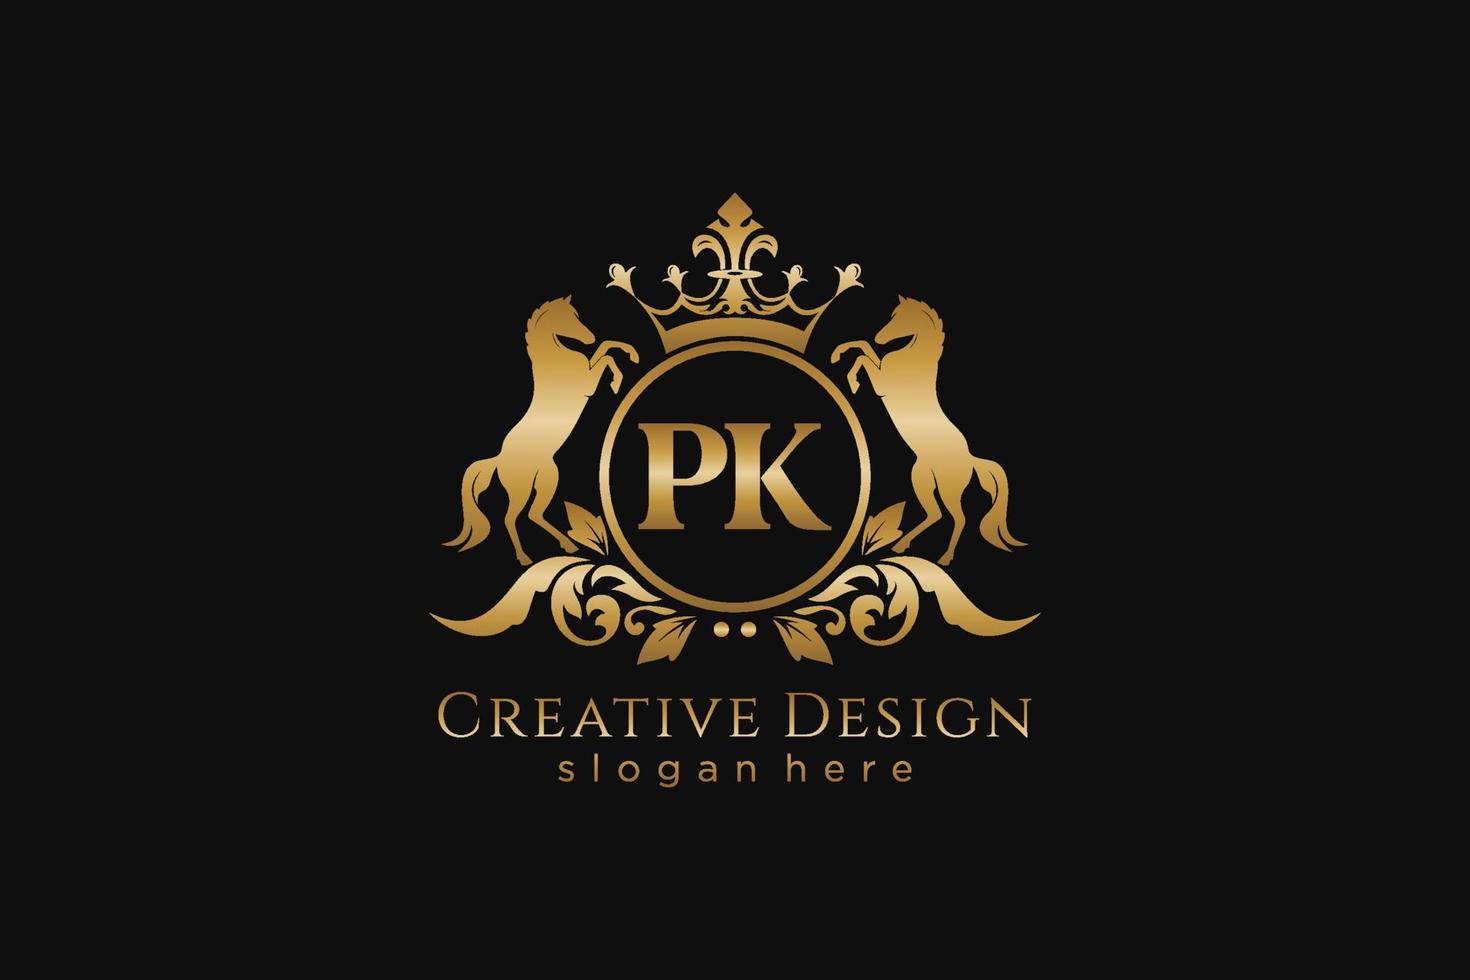 initial PK Retro golden crest with circle and two horses, badge template with scrolls and royal crown - perfect for luxurious branding projects vector